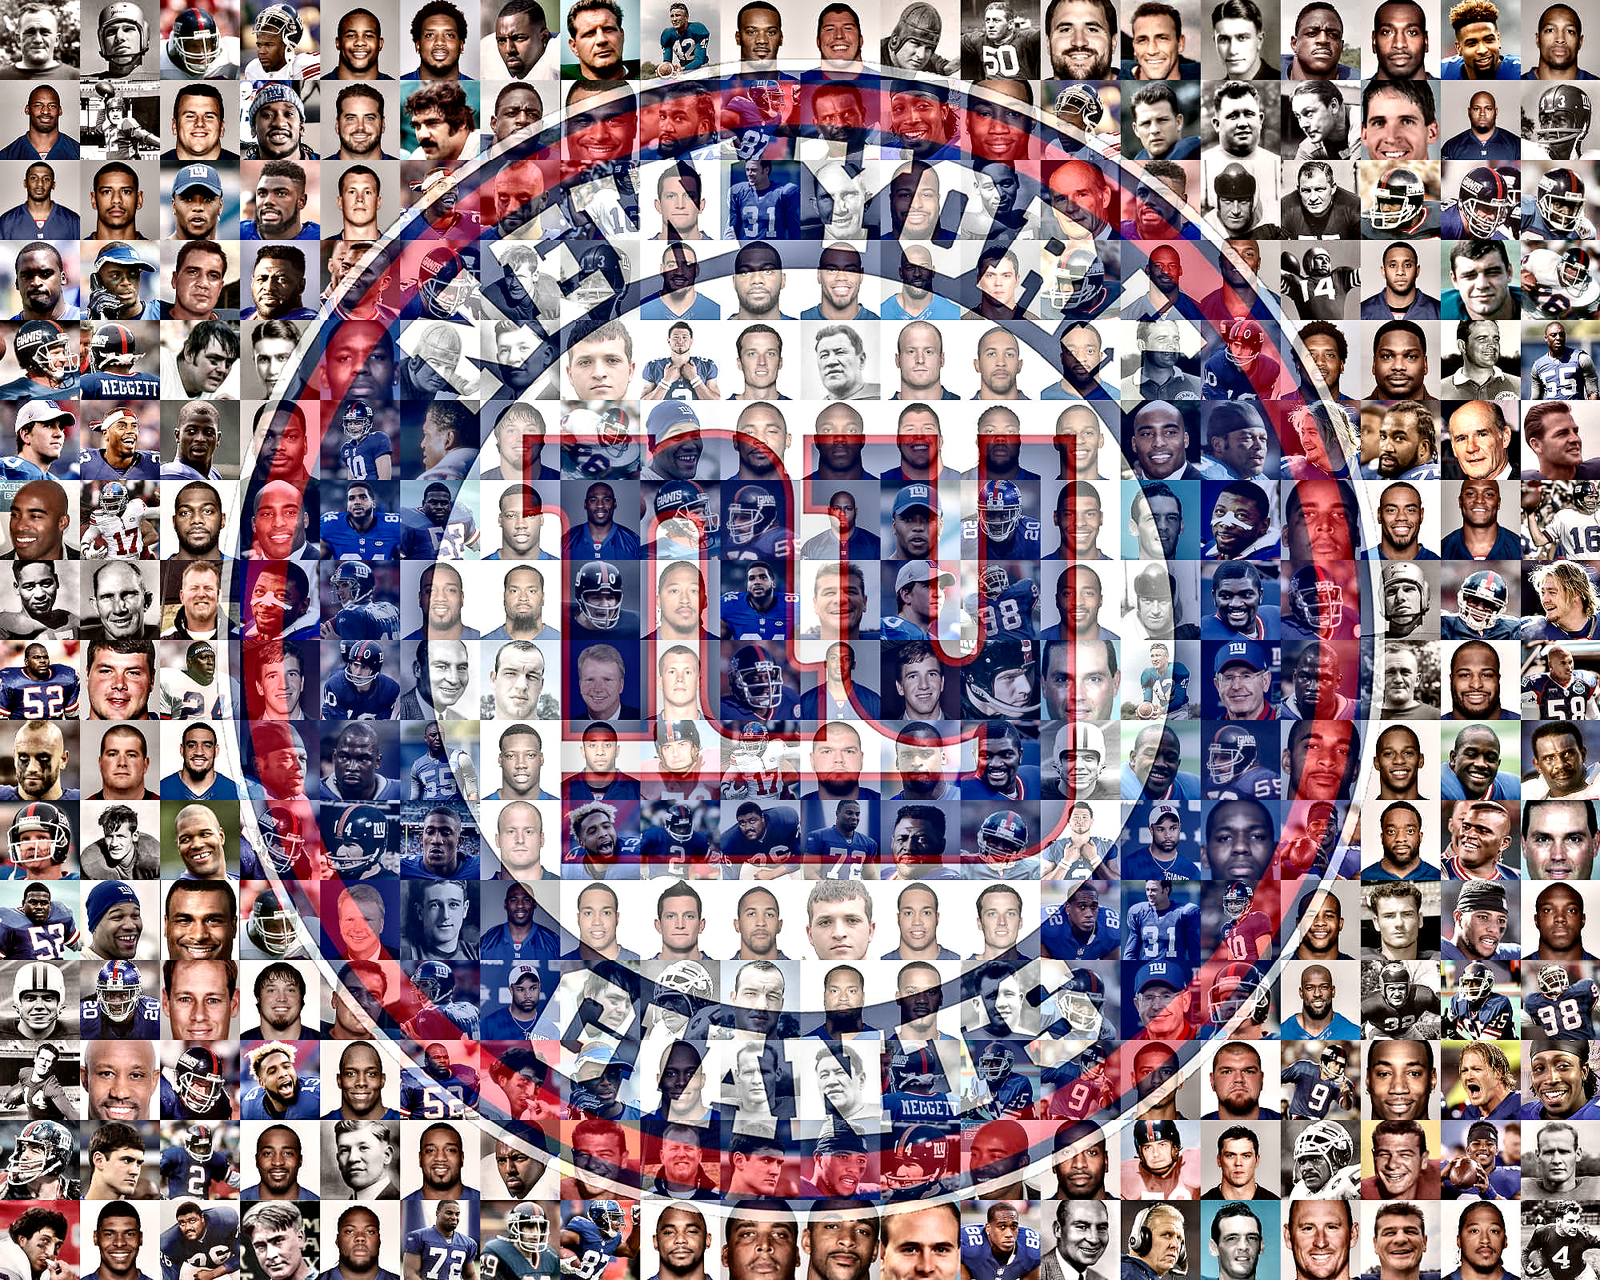 New York Giants Photo Mosaic Print Art using over 100 Past and Present Players - $44.00 - $149.00